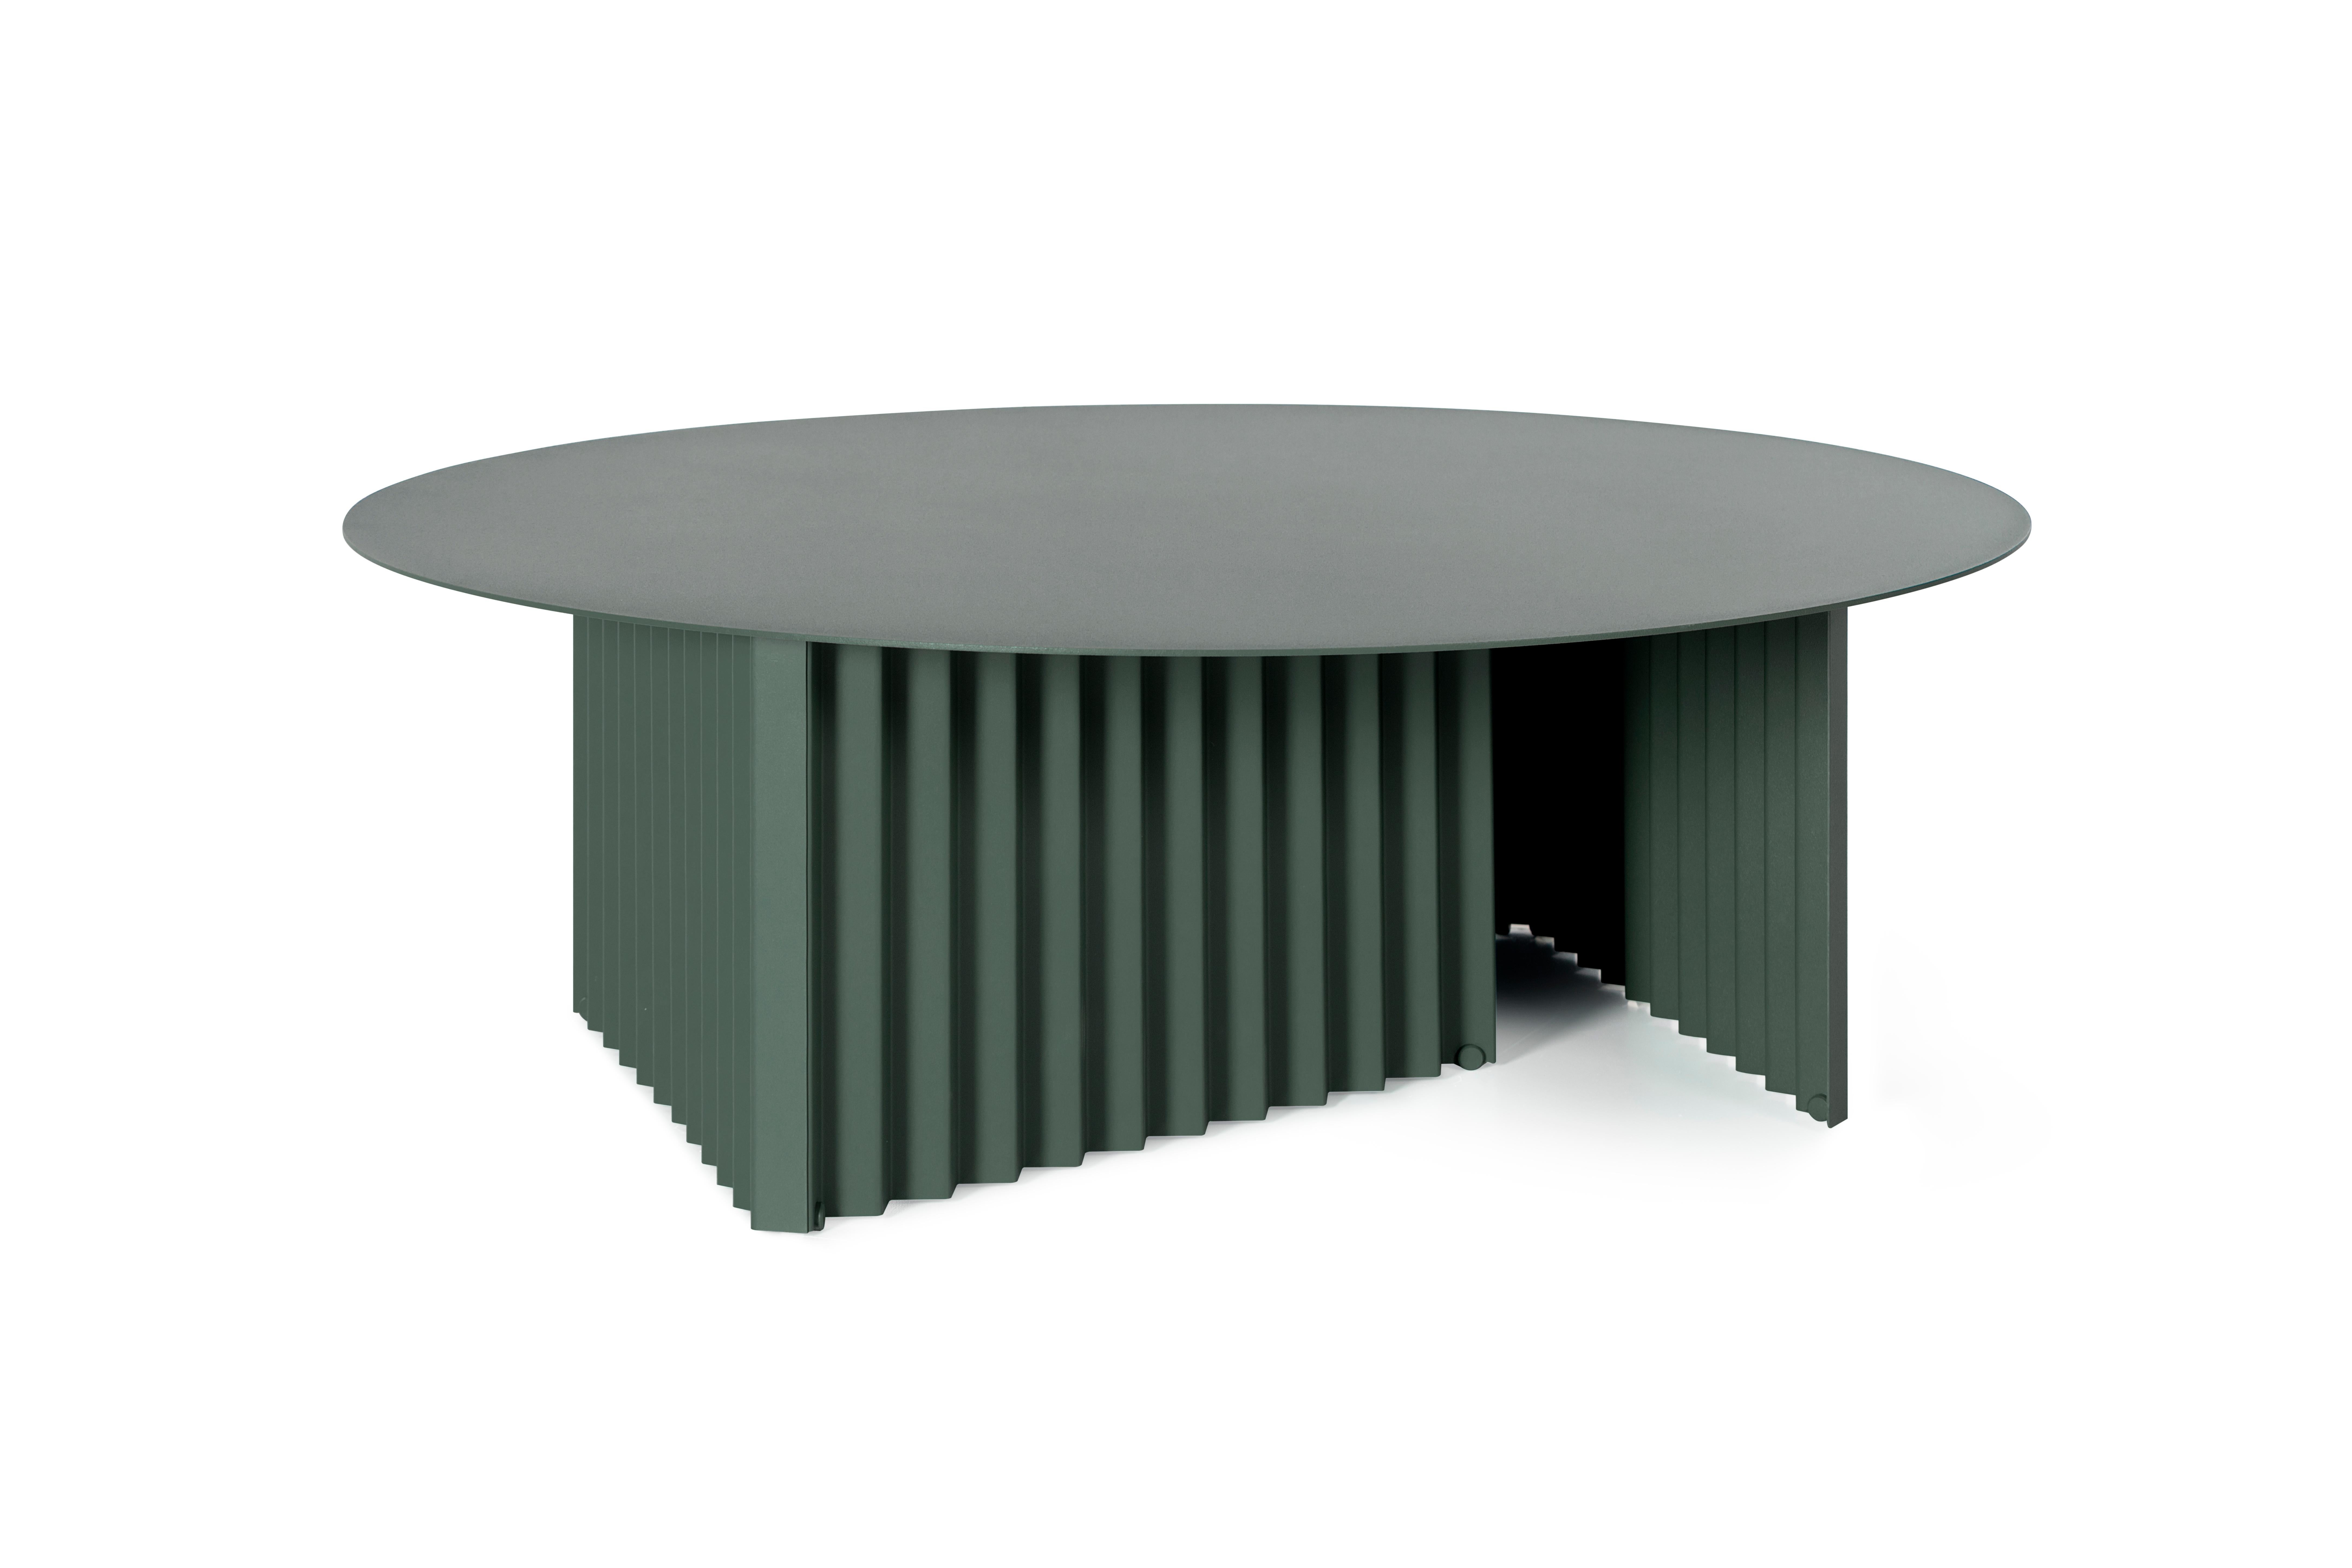 RS Barcelona Plec Round Large Table in Green Metal by A.P.O.